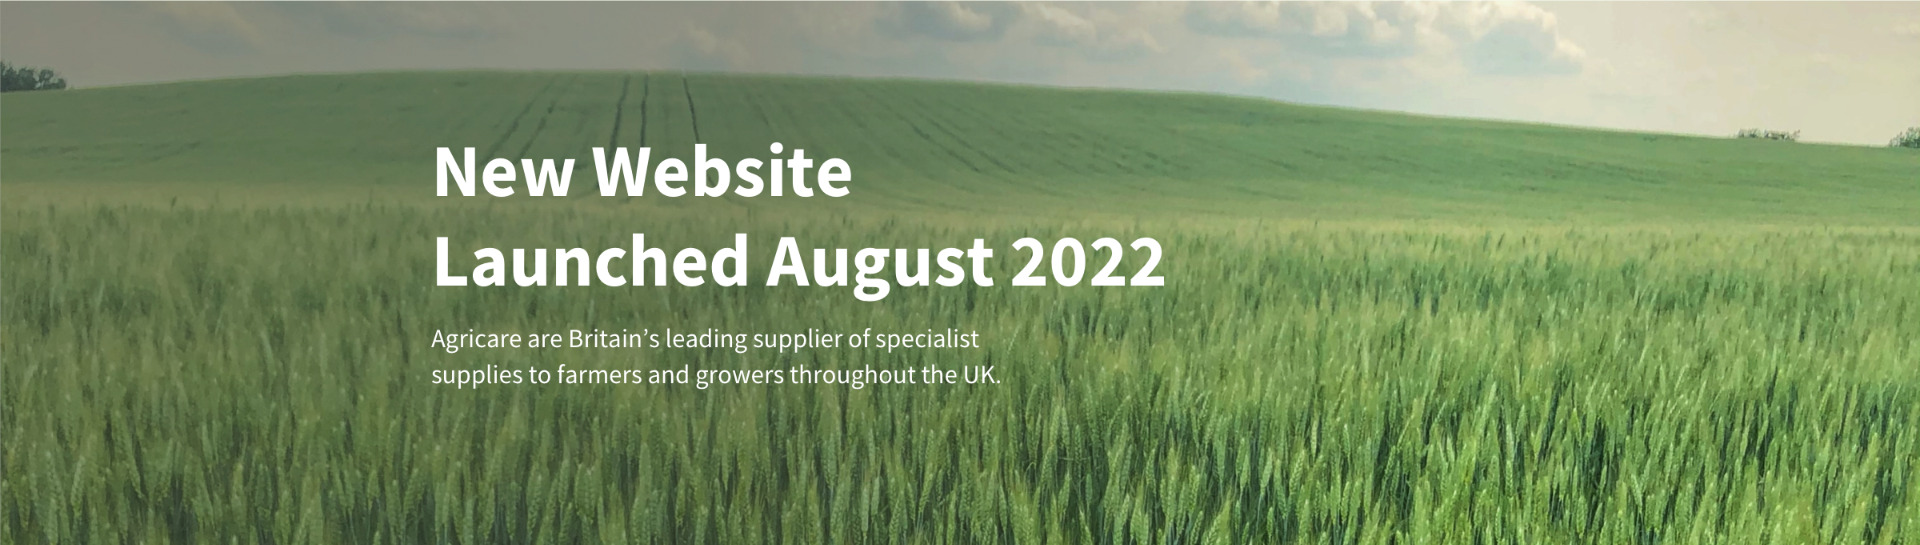 New website launched August 2022. Agricare are Britain's leading supplier of specialist supplies to farmers and growers throughout the UK